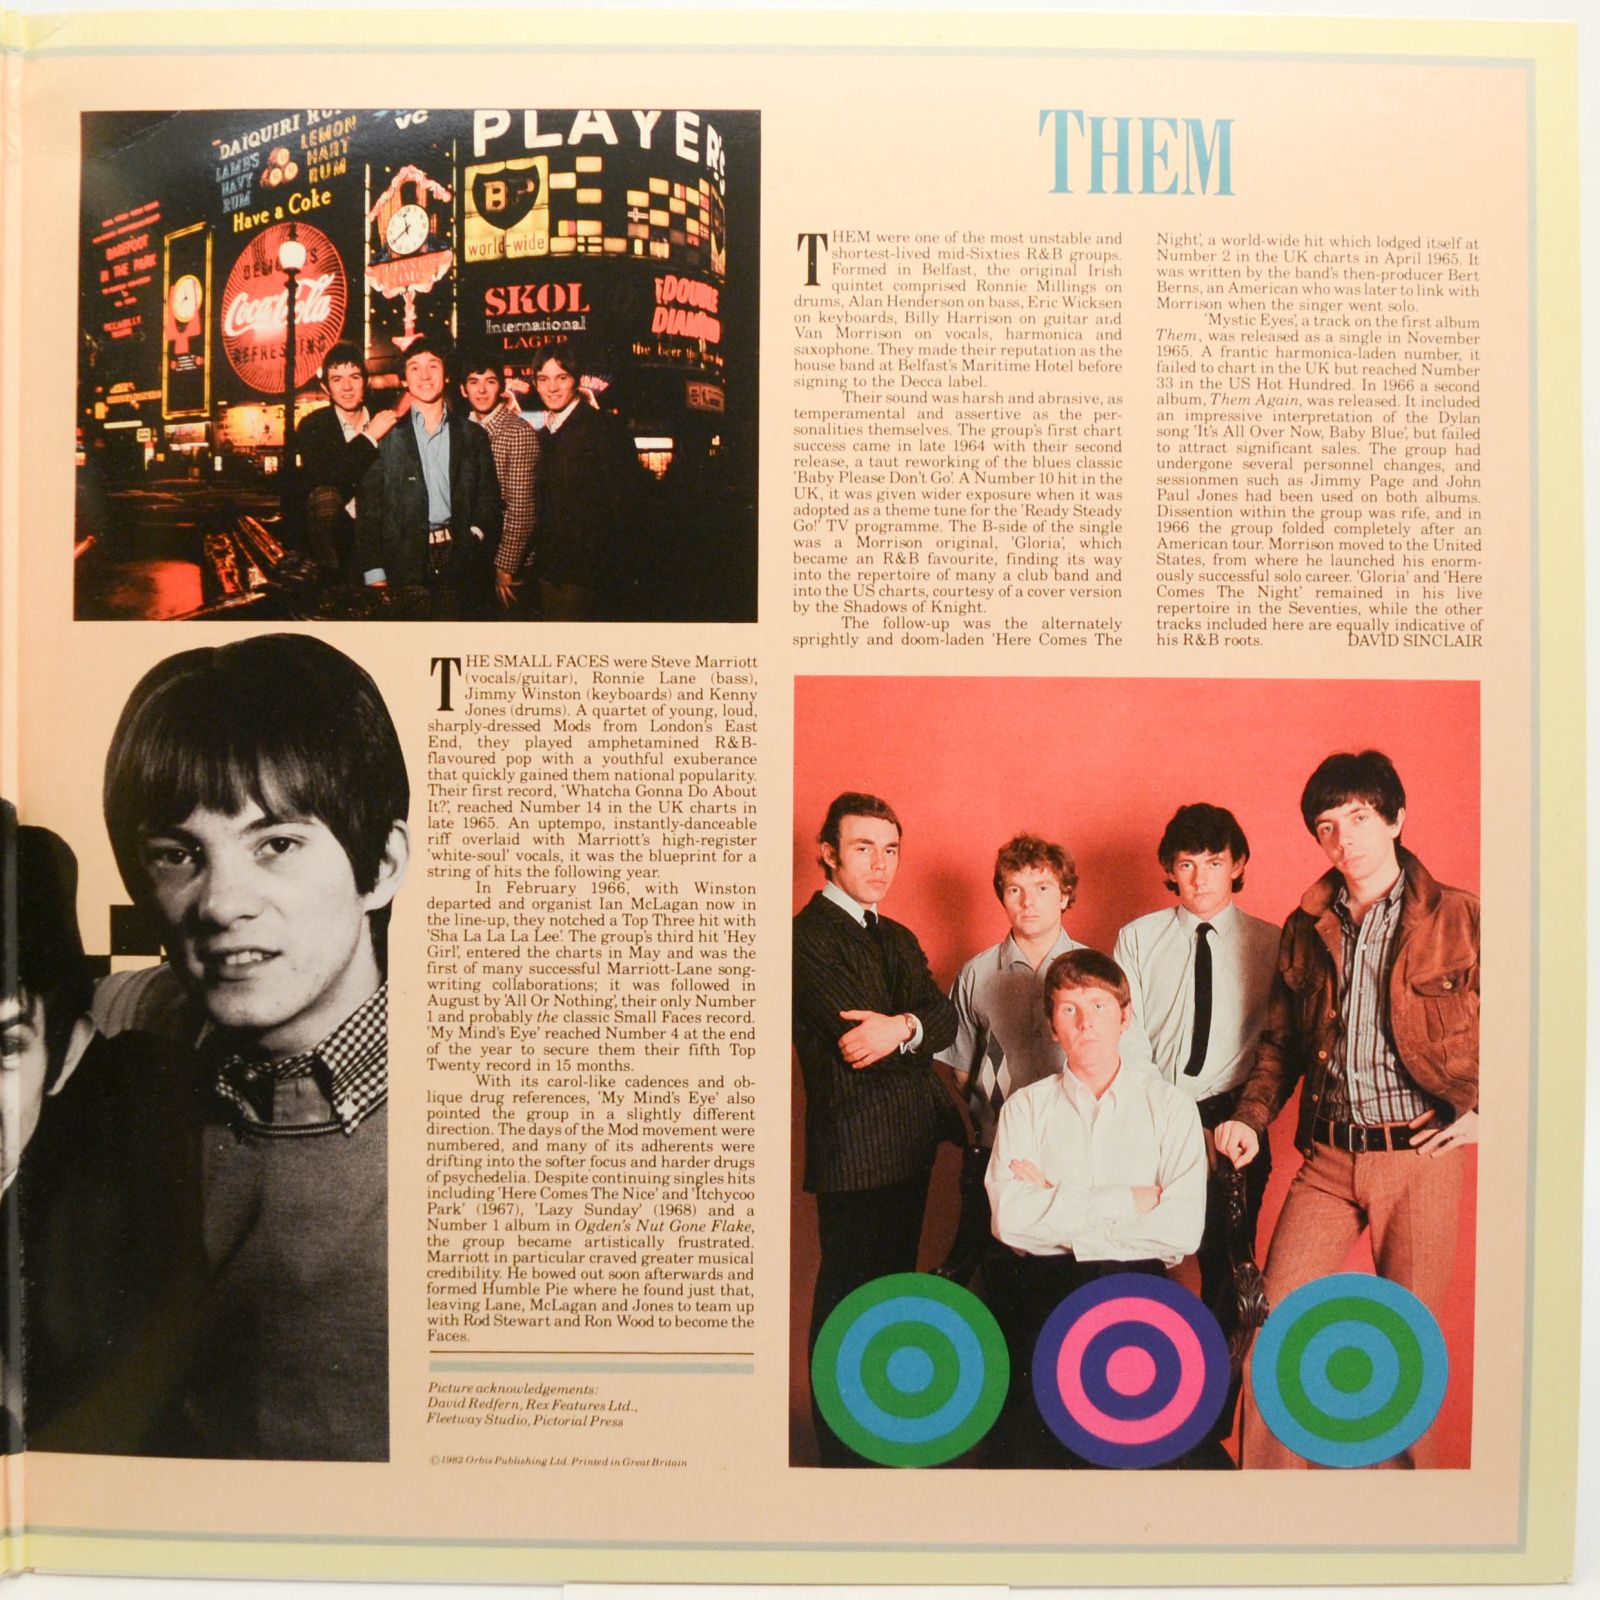 John Mayall's Bluesbreakers / The Small Faces / Them — The History Of Rock (Volume Eleven) (UK), 1982